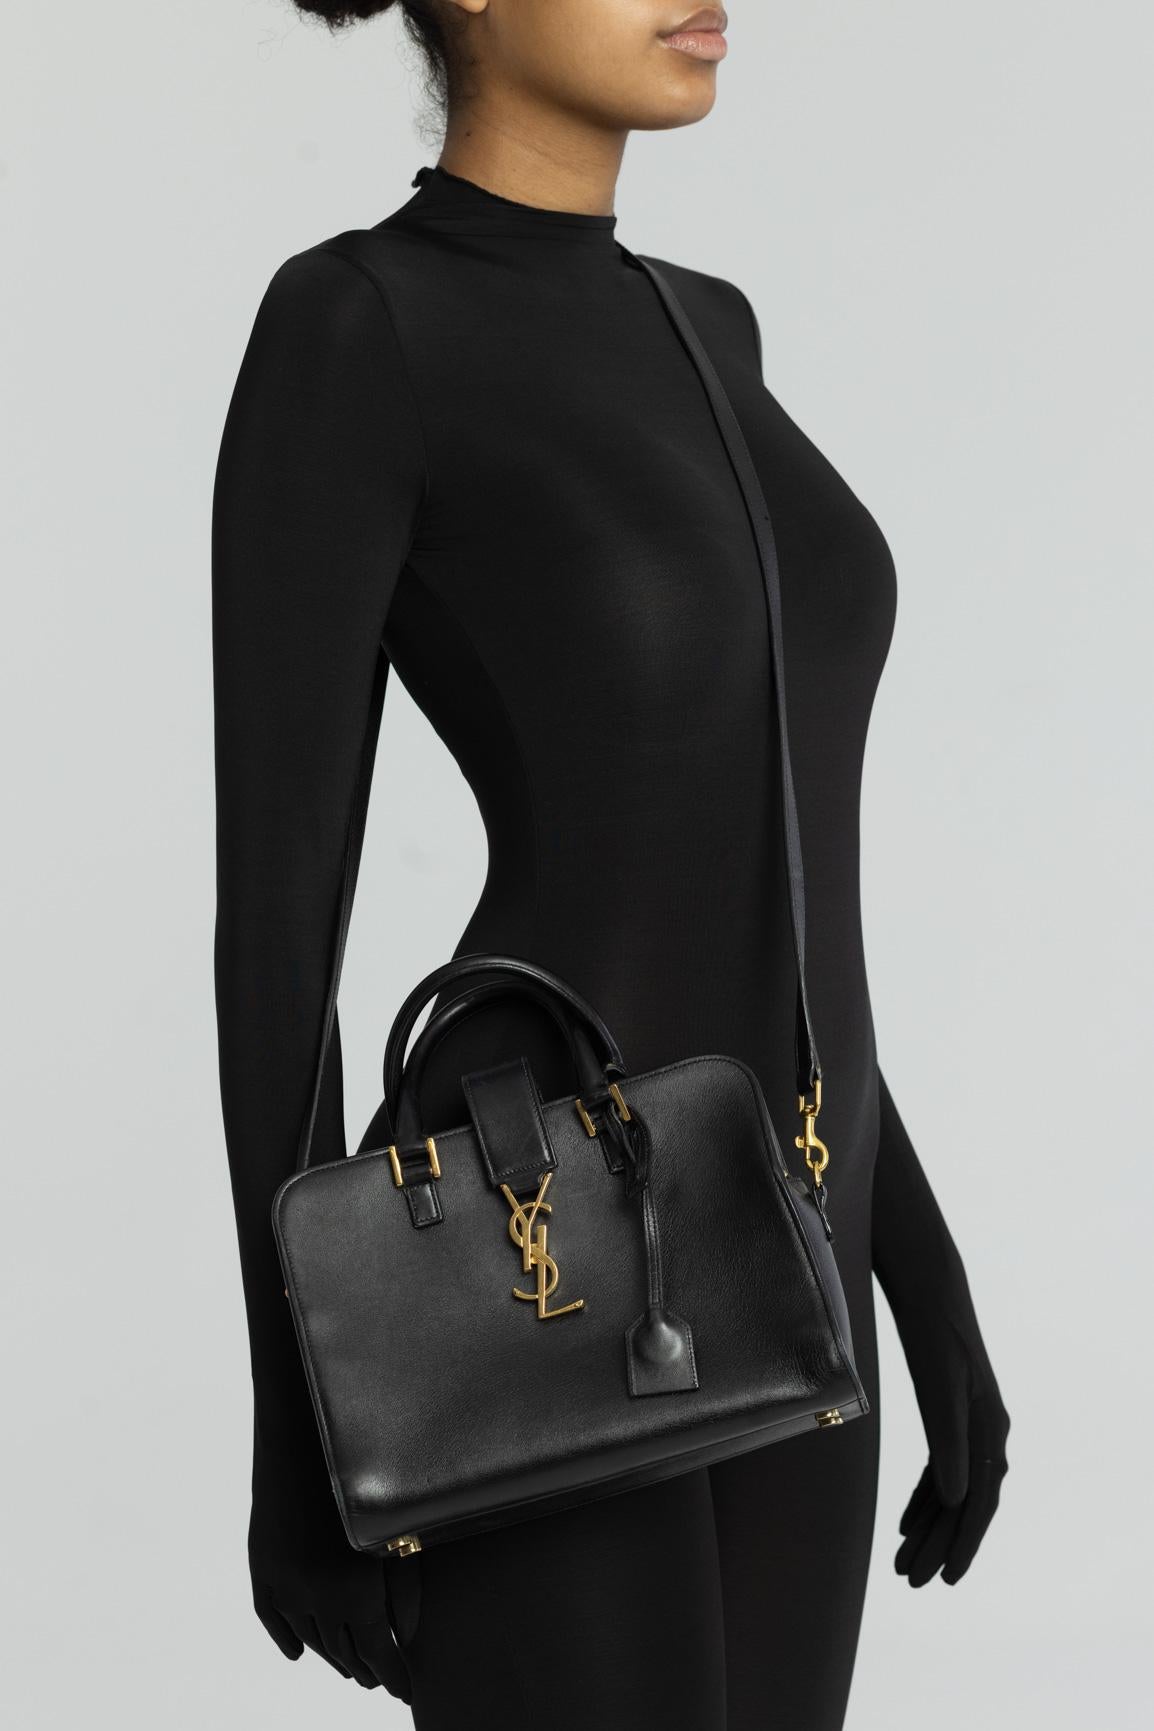 This bag is made of smooth calfskin leather in black. The bag features rolled leather top handles and a crossover strap with a weighted gold YSL monogram. The top zippers open to a matching black calfskin leather interior with zipper and patch